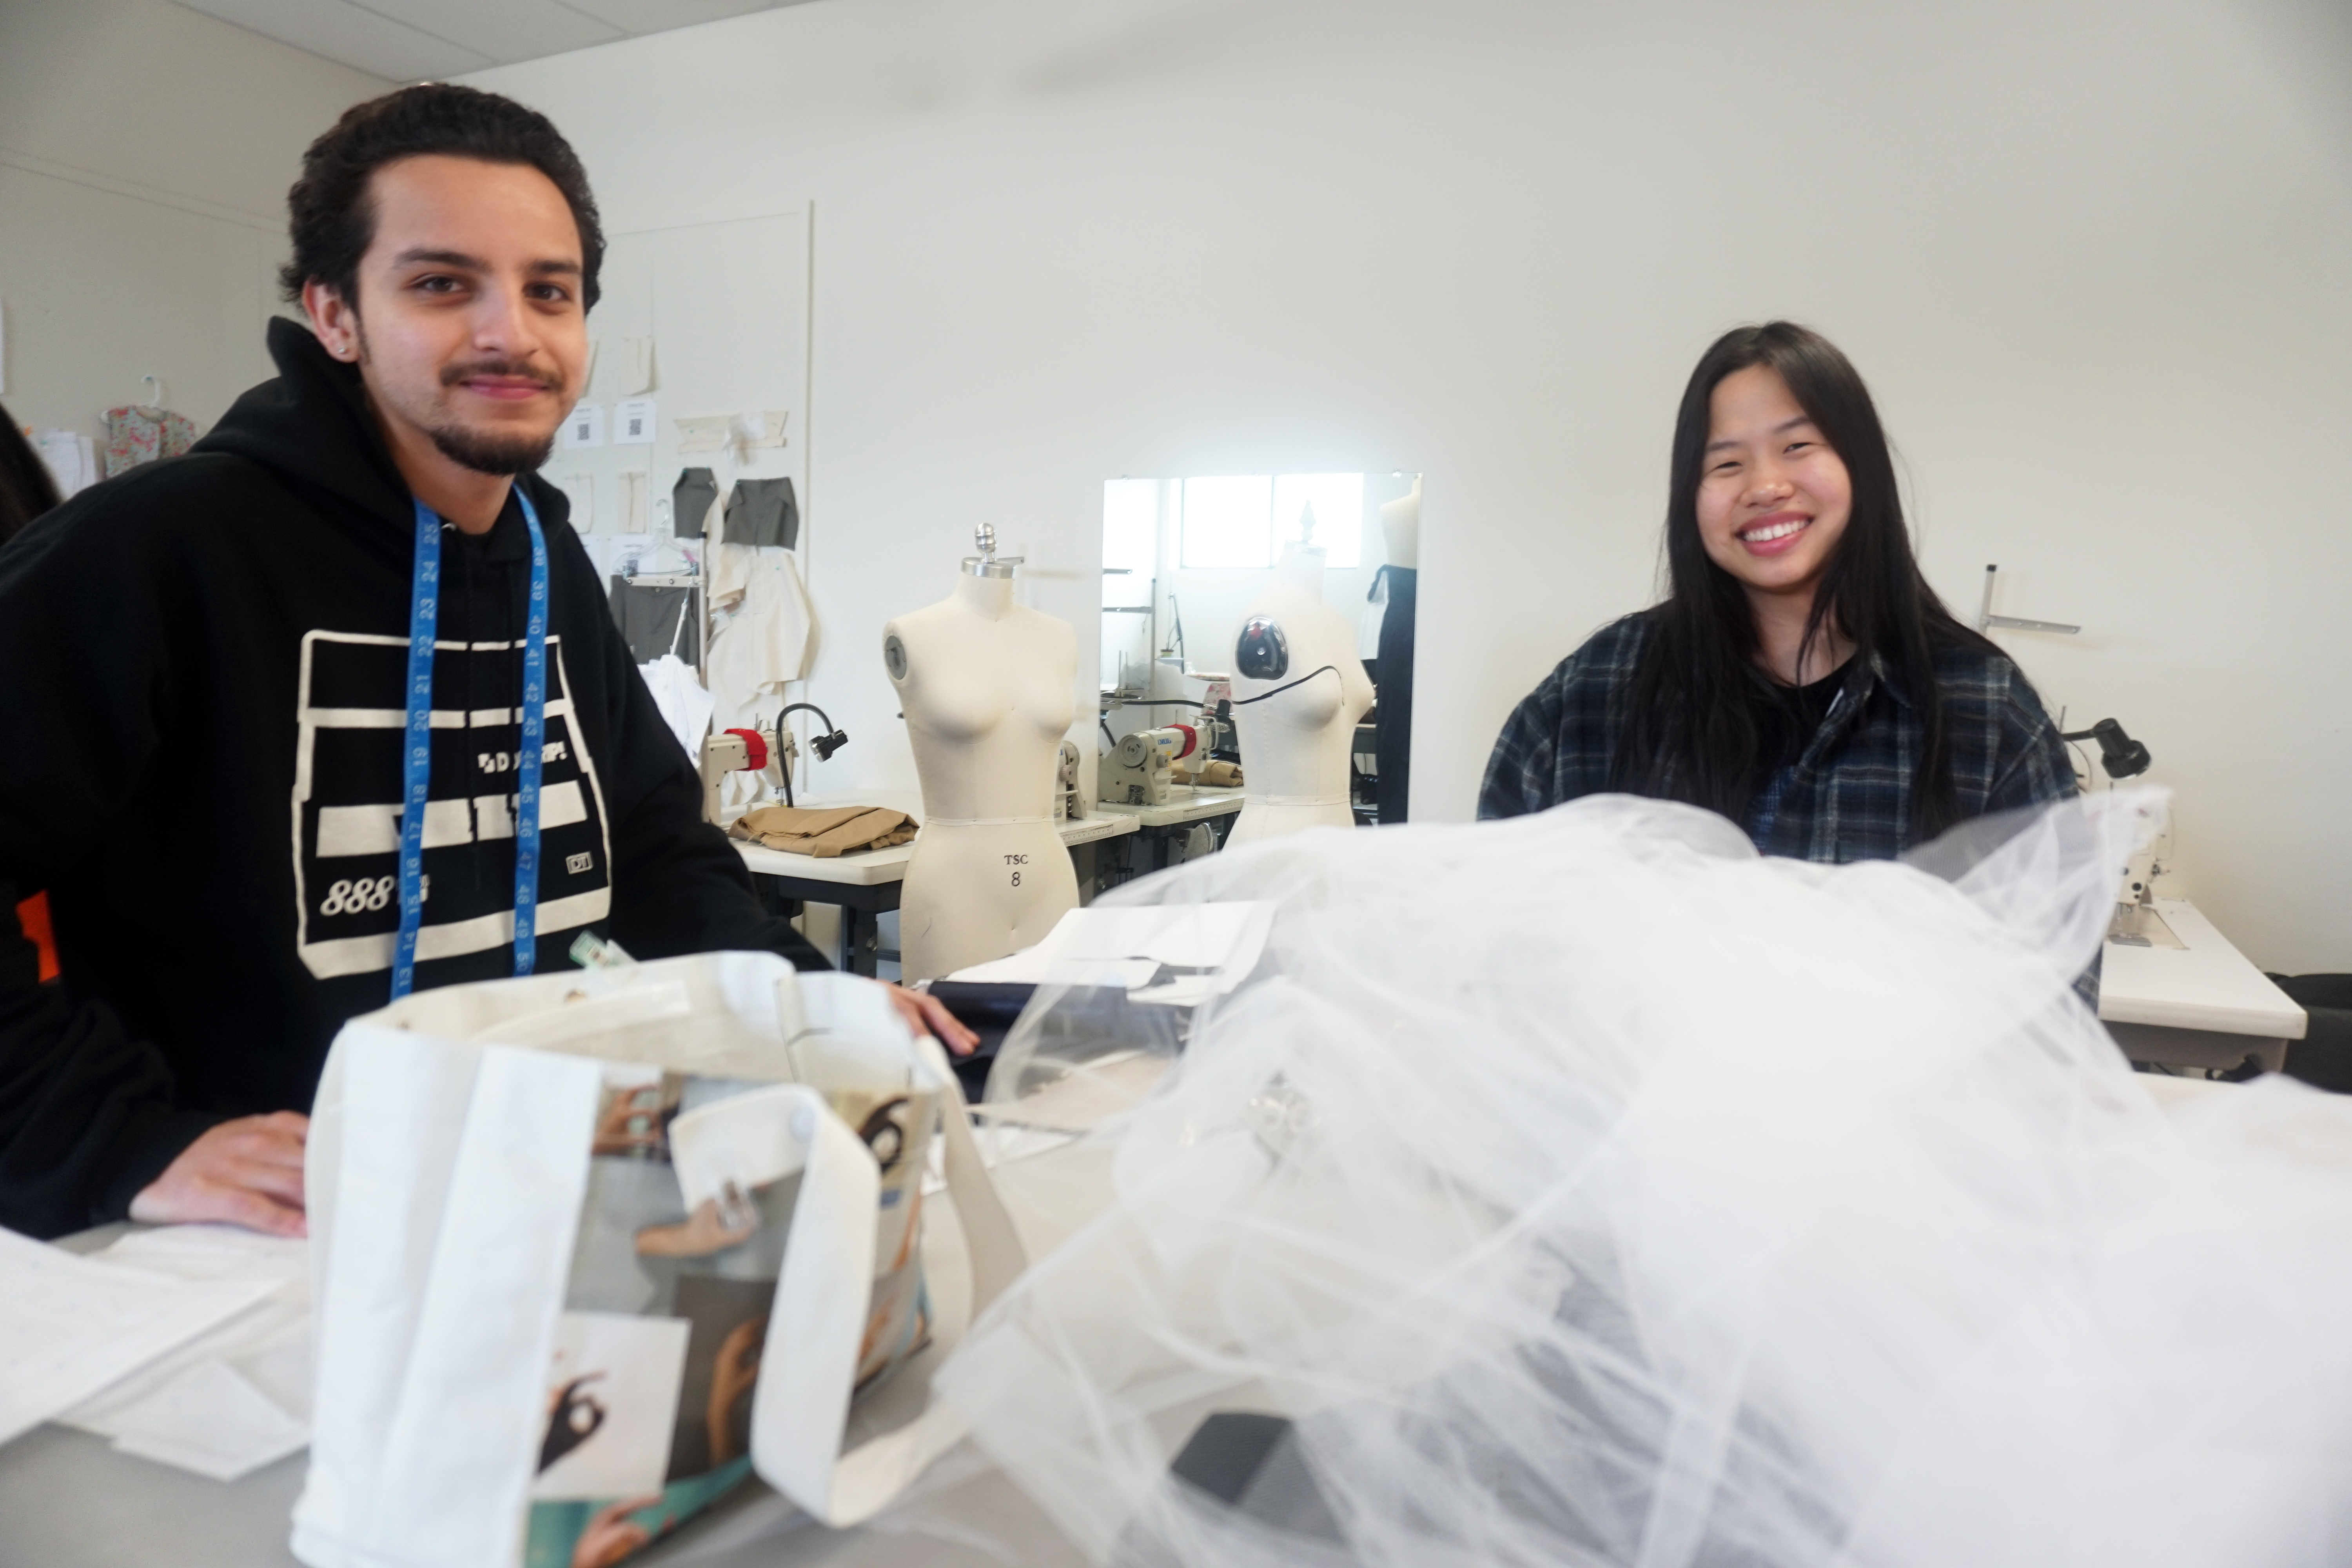 91 University Fashion Design majors received a grant to research sustainable fashion.